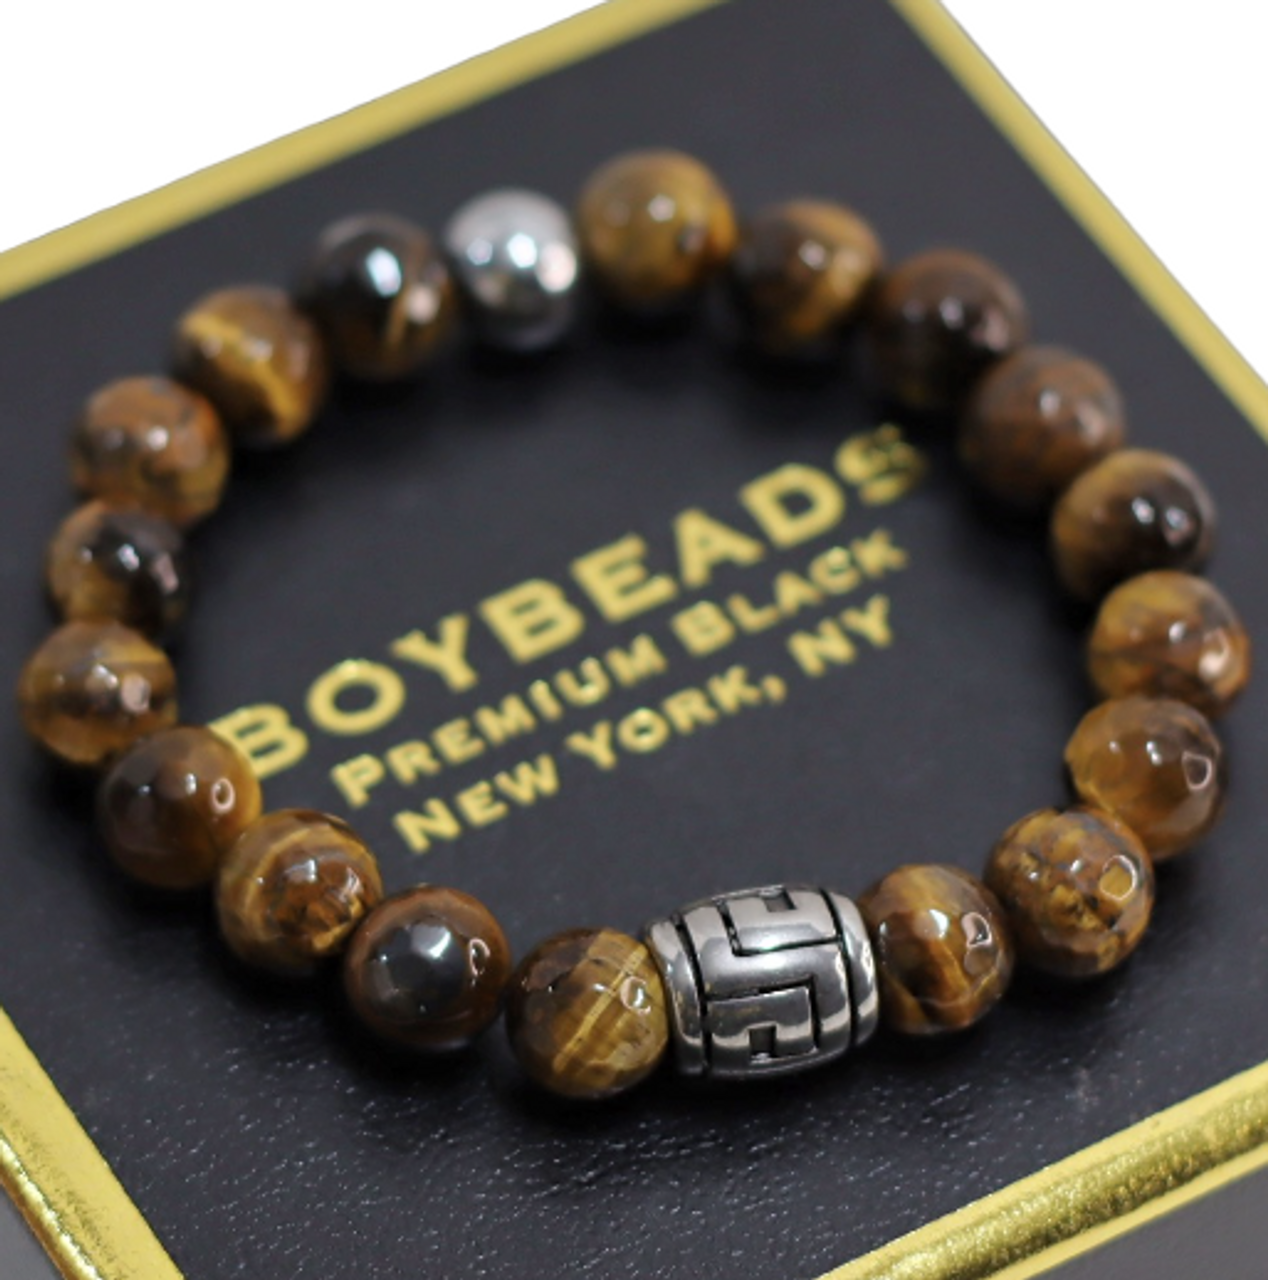 Tiger's Eye Beads for Sale